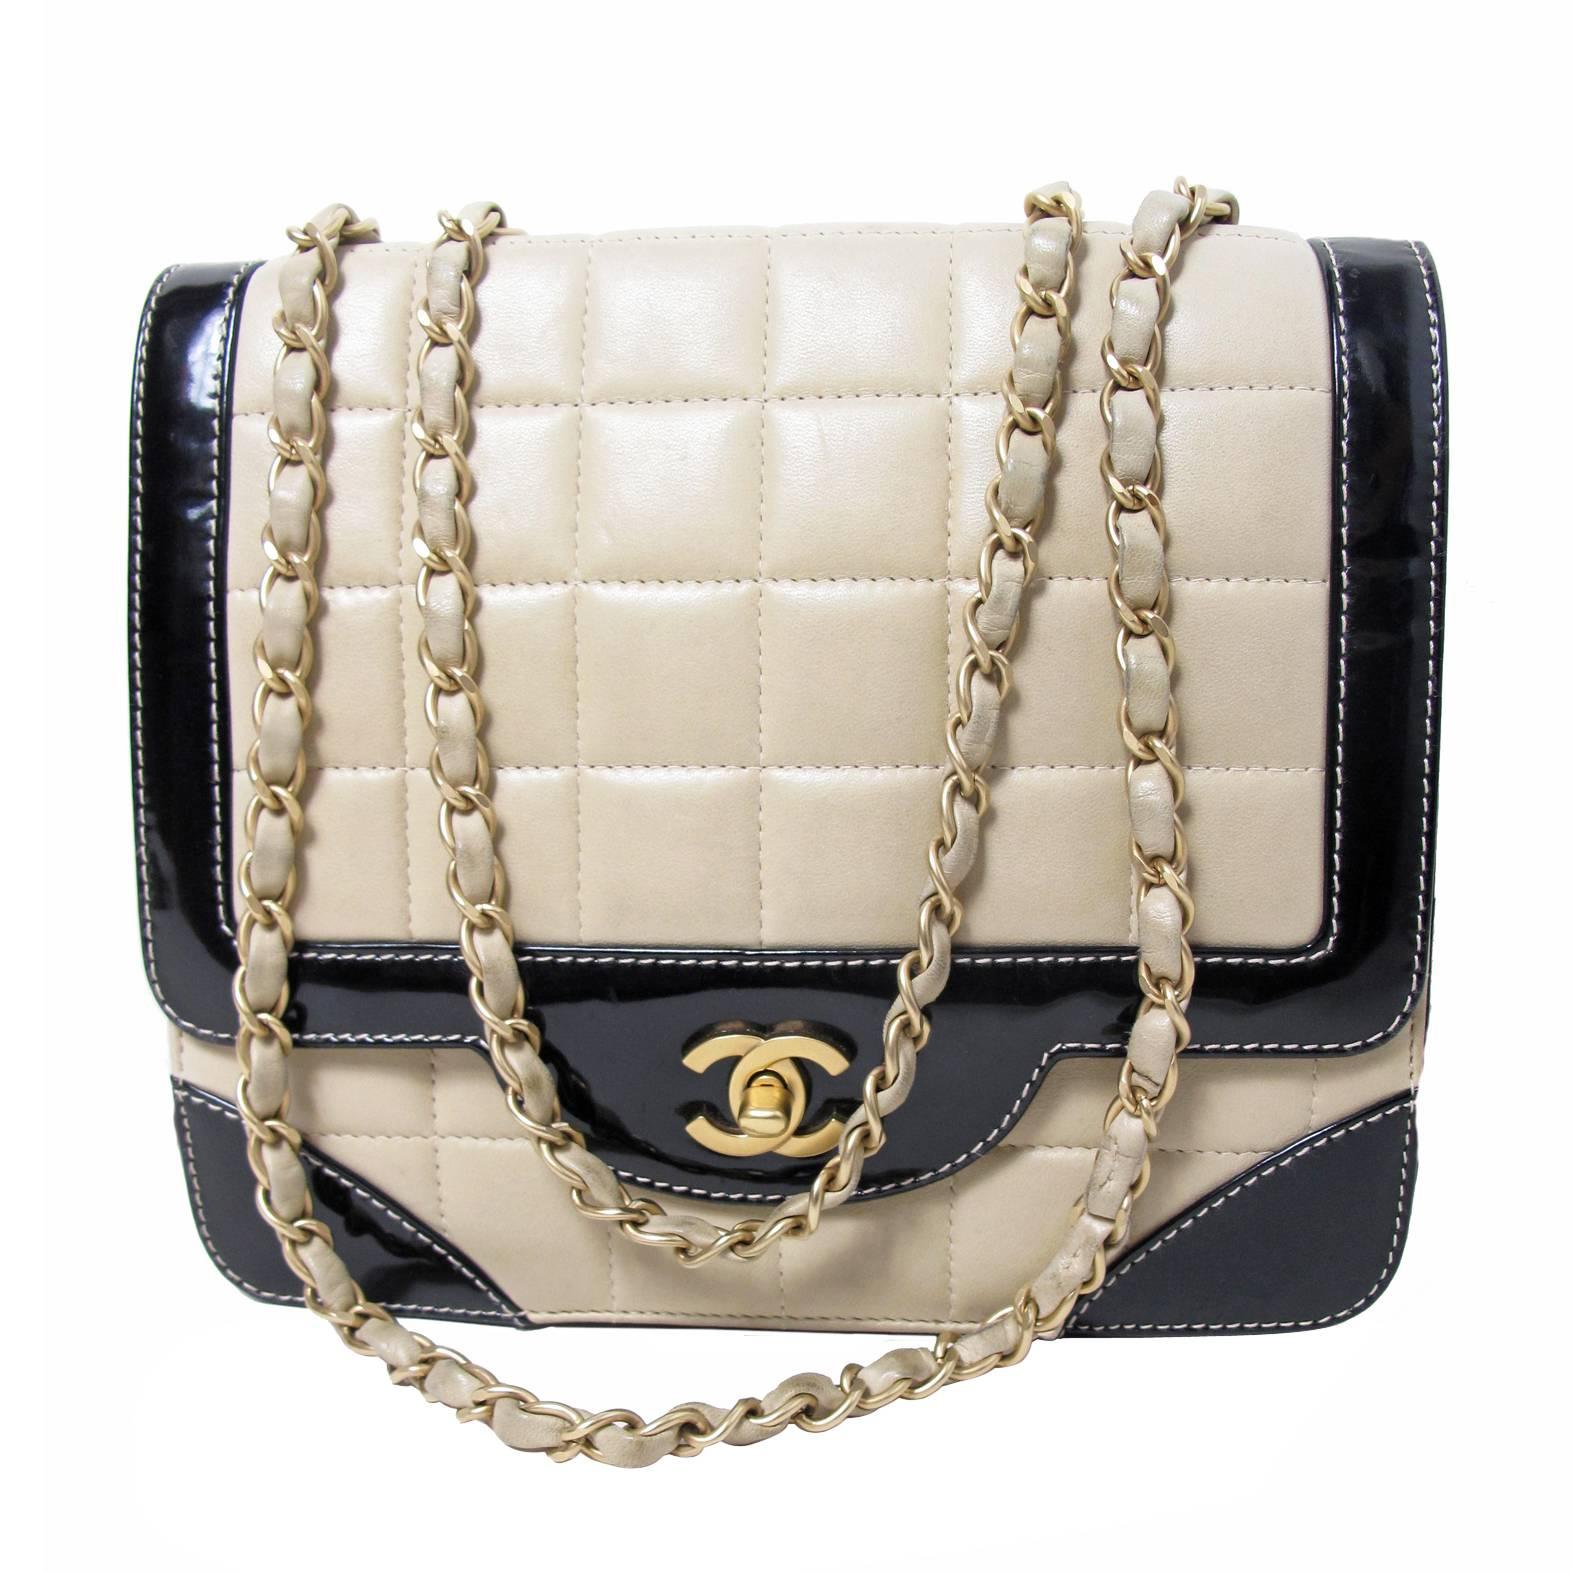 Chanel Quilted Leather and Patent Bag - Sale